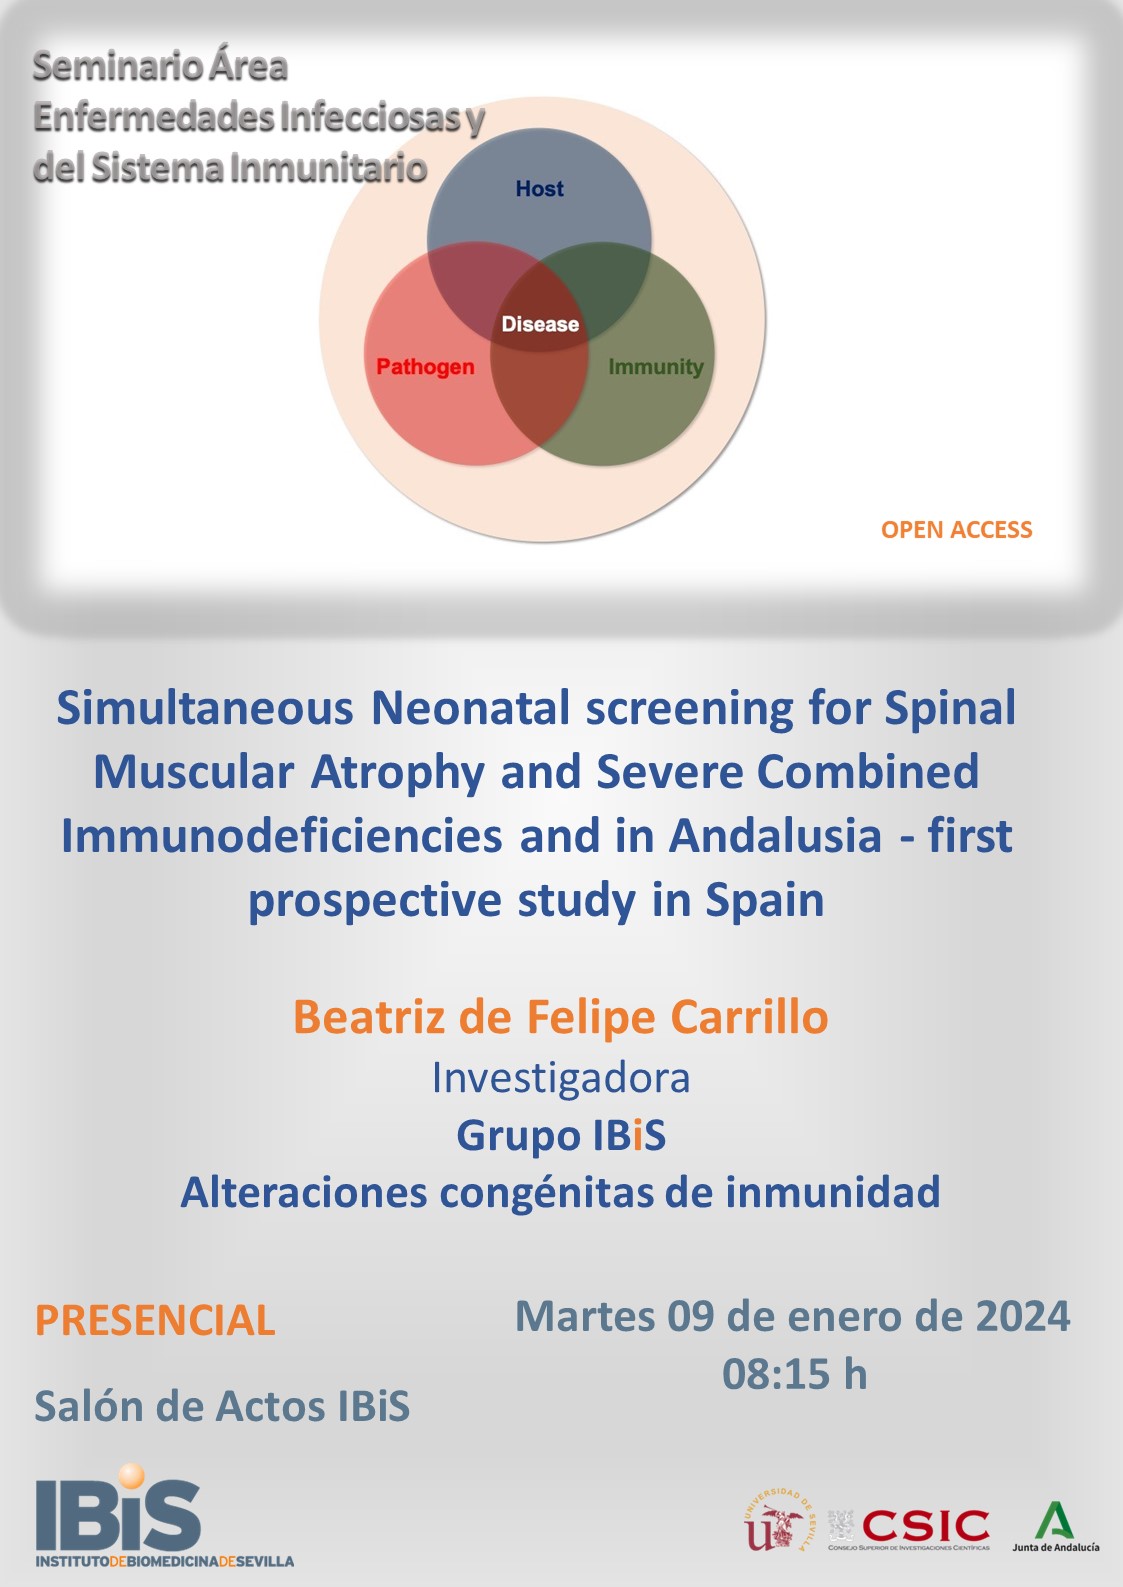 Poster: Simultaneous Neonatal screening for Spinal Muscular Atrophy and Severe Combined Immunodeficiencies and in Andalusia - first prospective study in Spain